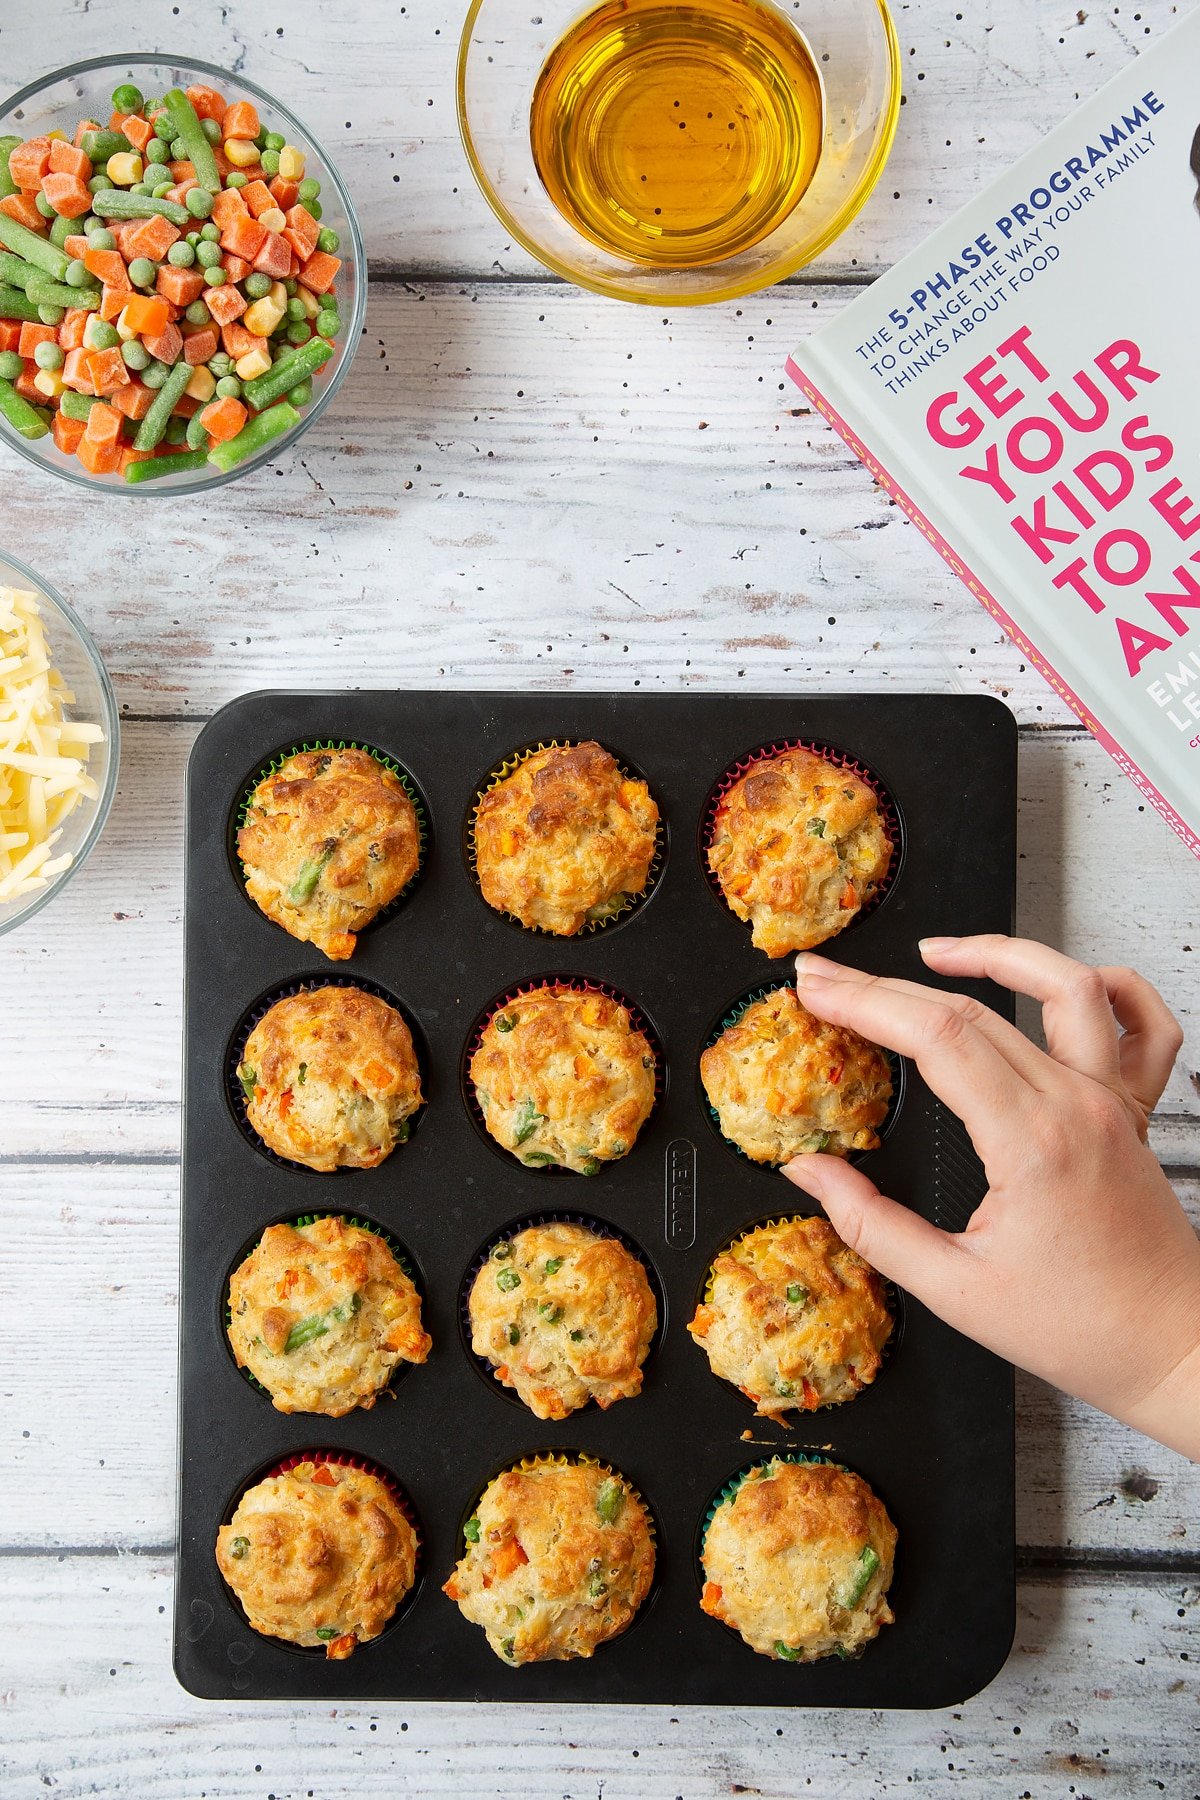 A 12-hole muffin tray filled with freshly baked savoury vegetable muffins, golden brown on top and studded with chopped vegetables. A hand reaches in to take a muffin.